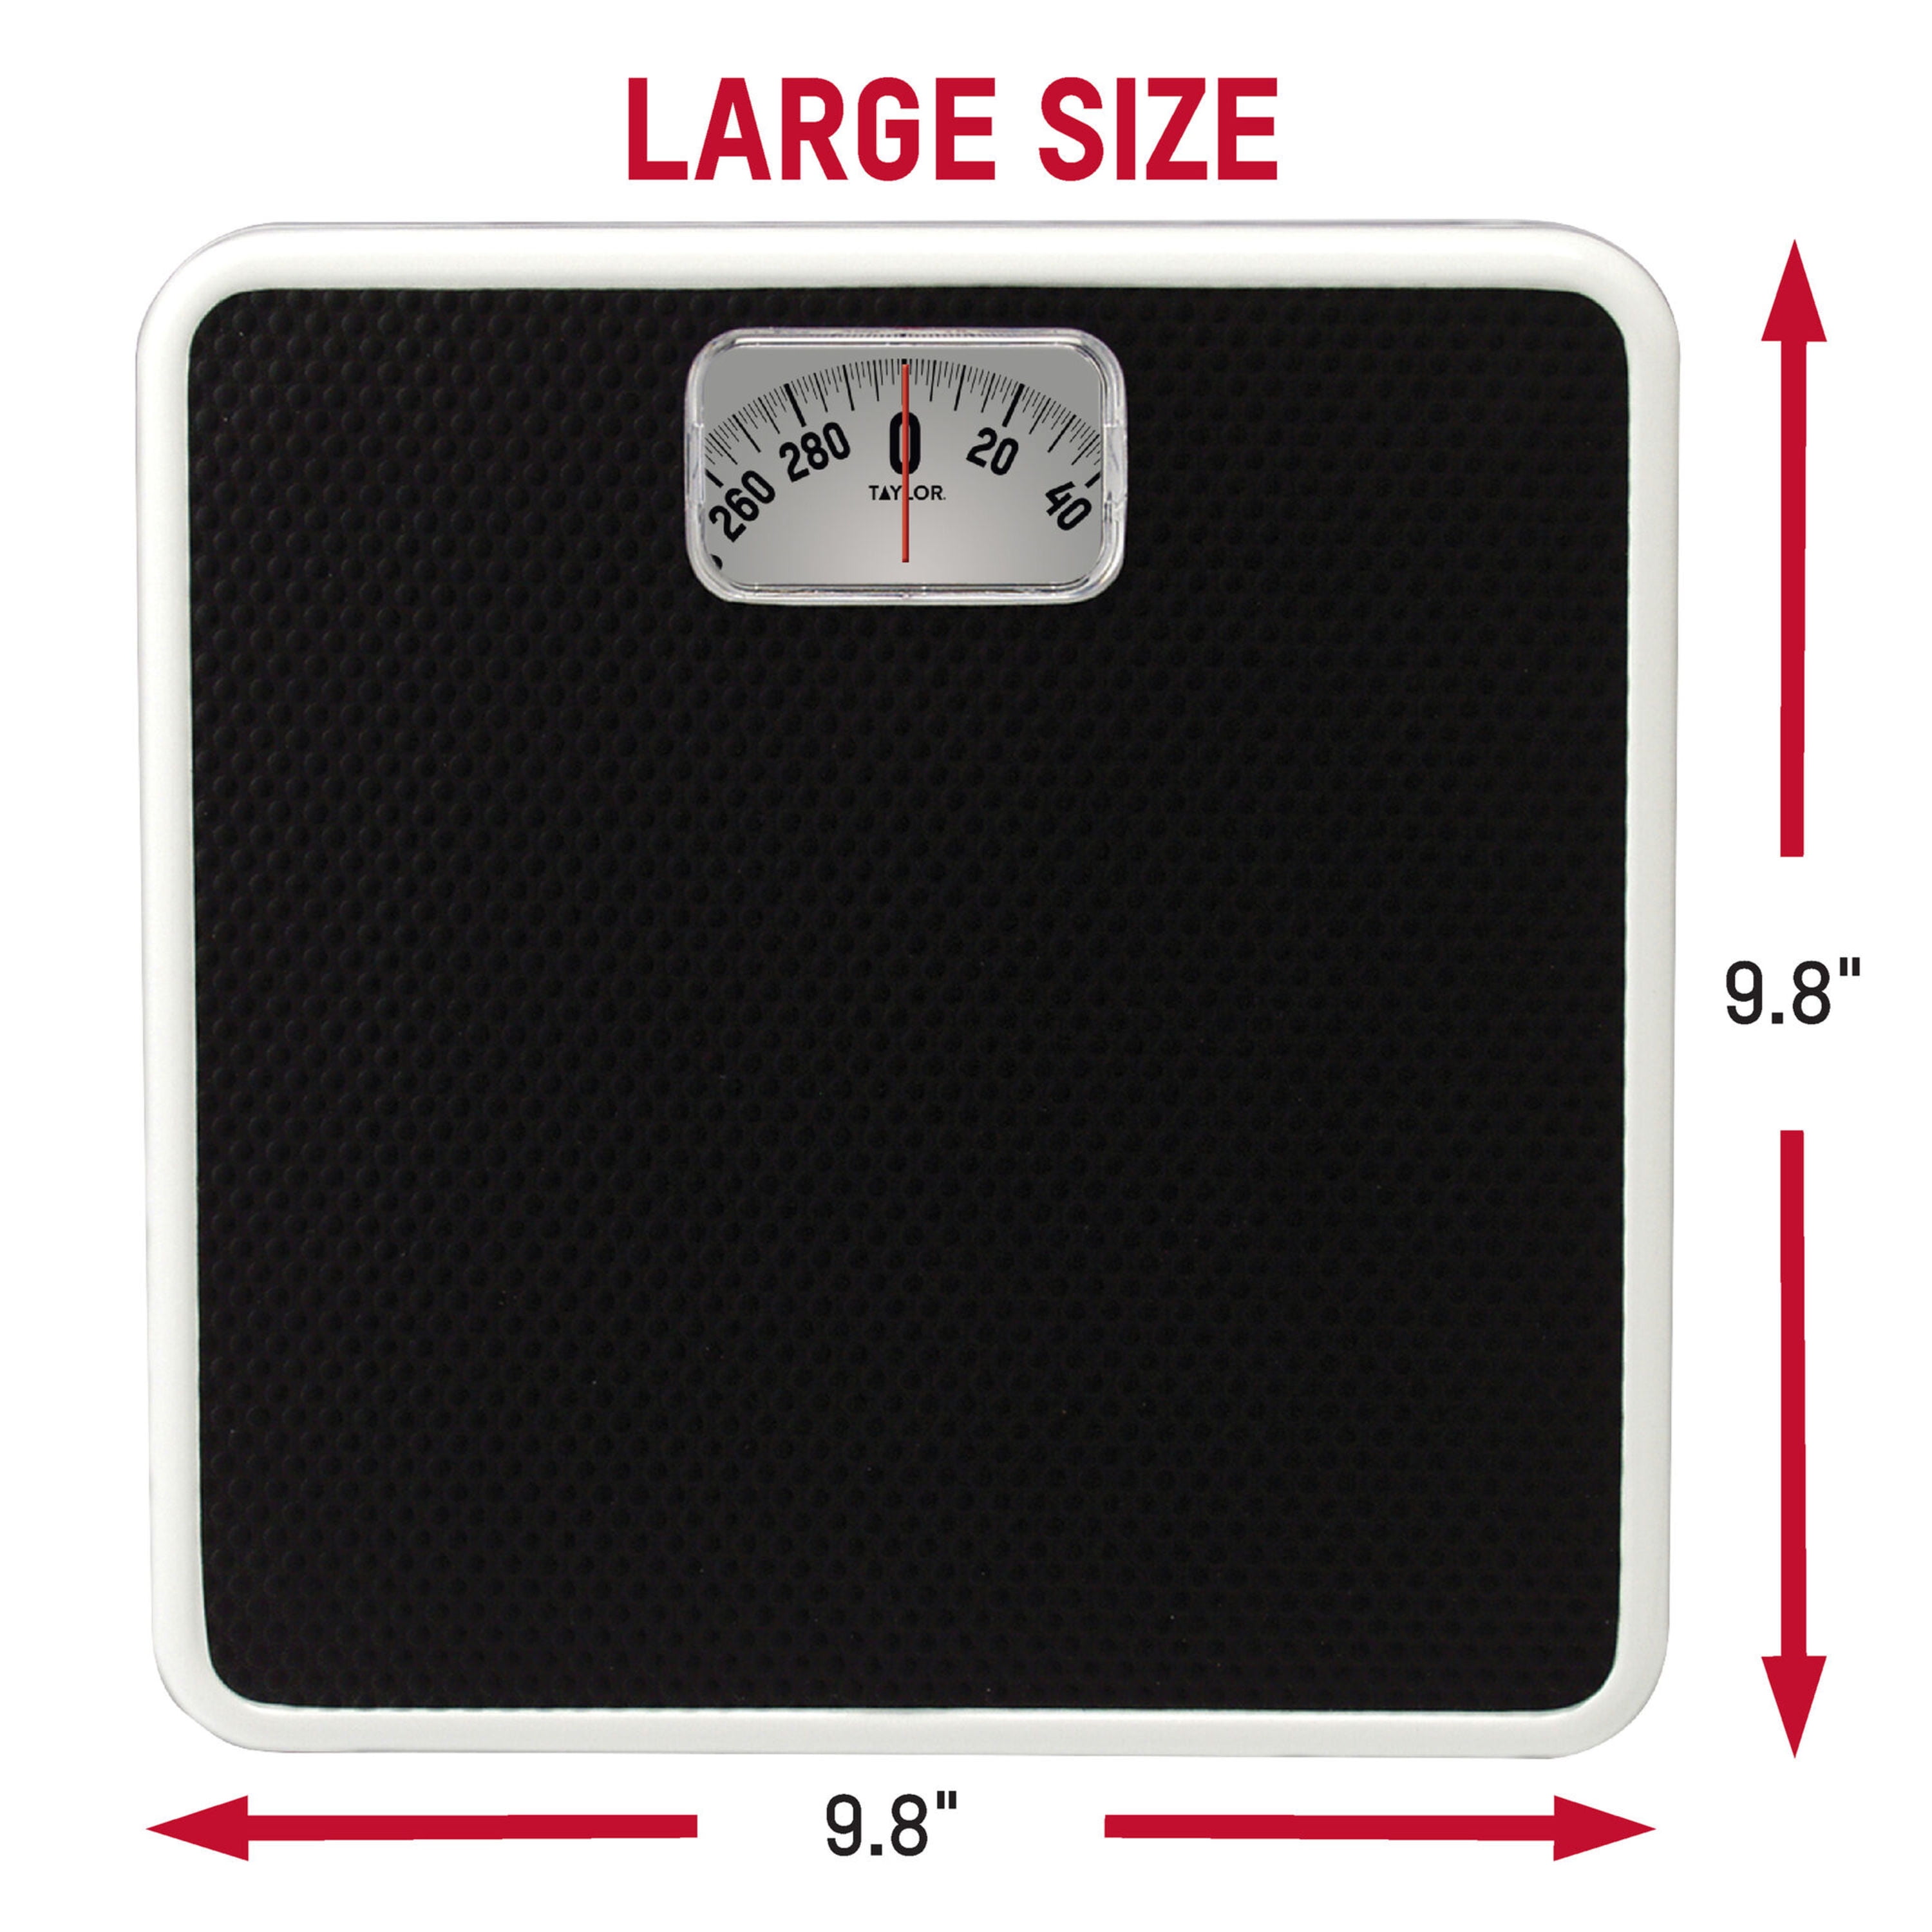 Taylor 9.8” x 9.8” 300 lb Analog Dial Bathroom Scale with Dial Display  Black 